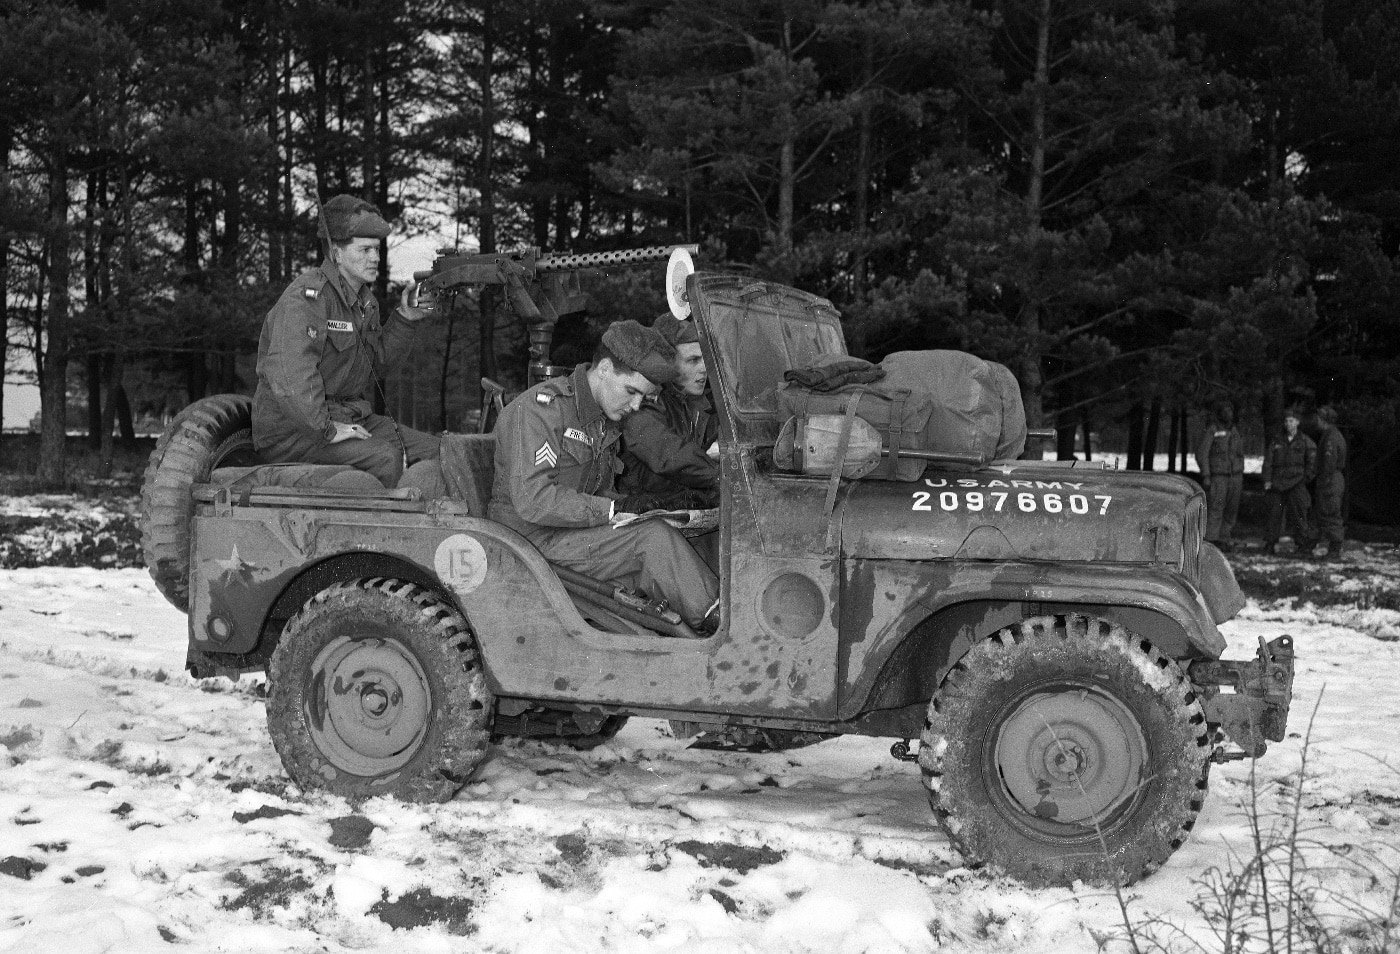 sgt elvis presley in us army west germany in m38a1 recon jeep